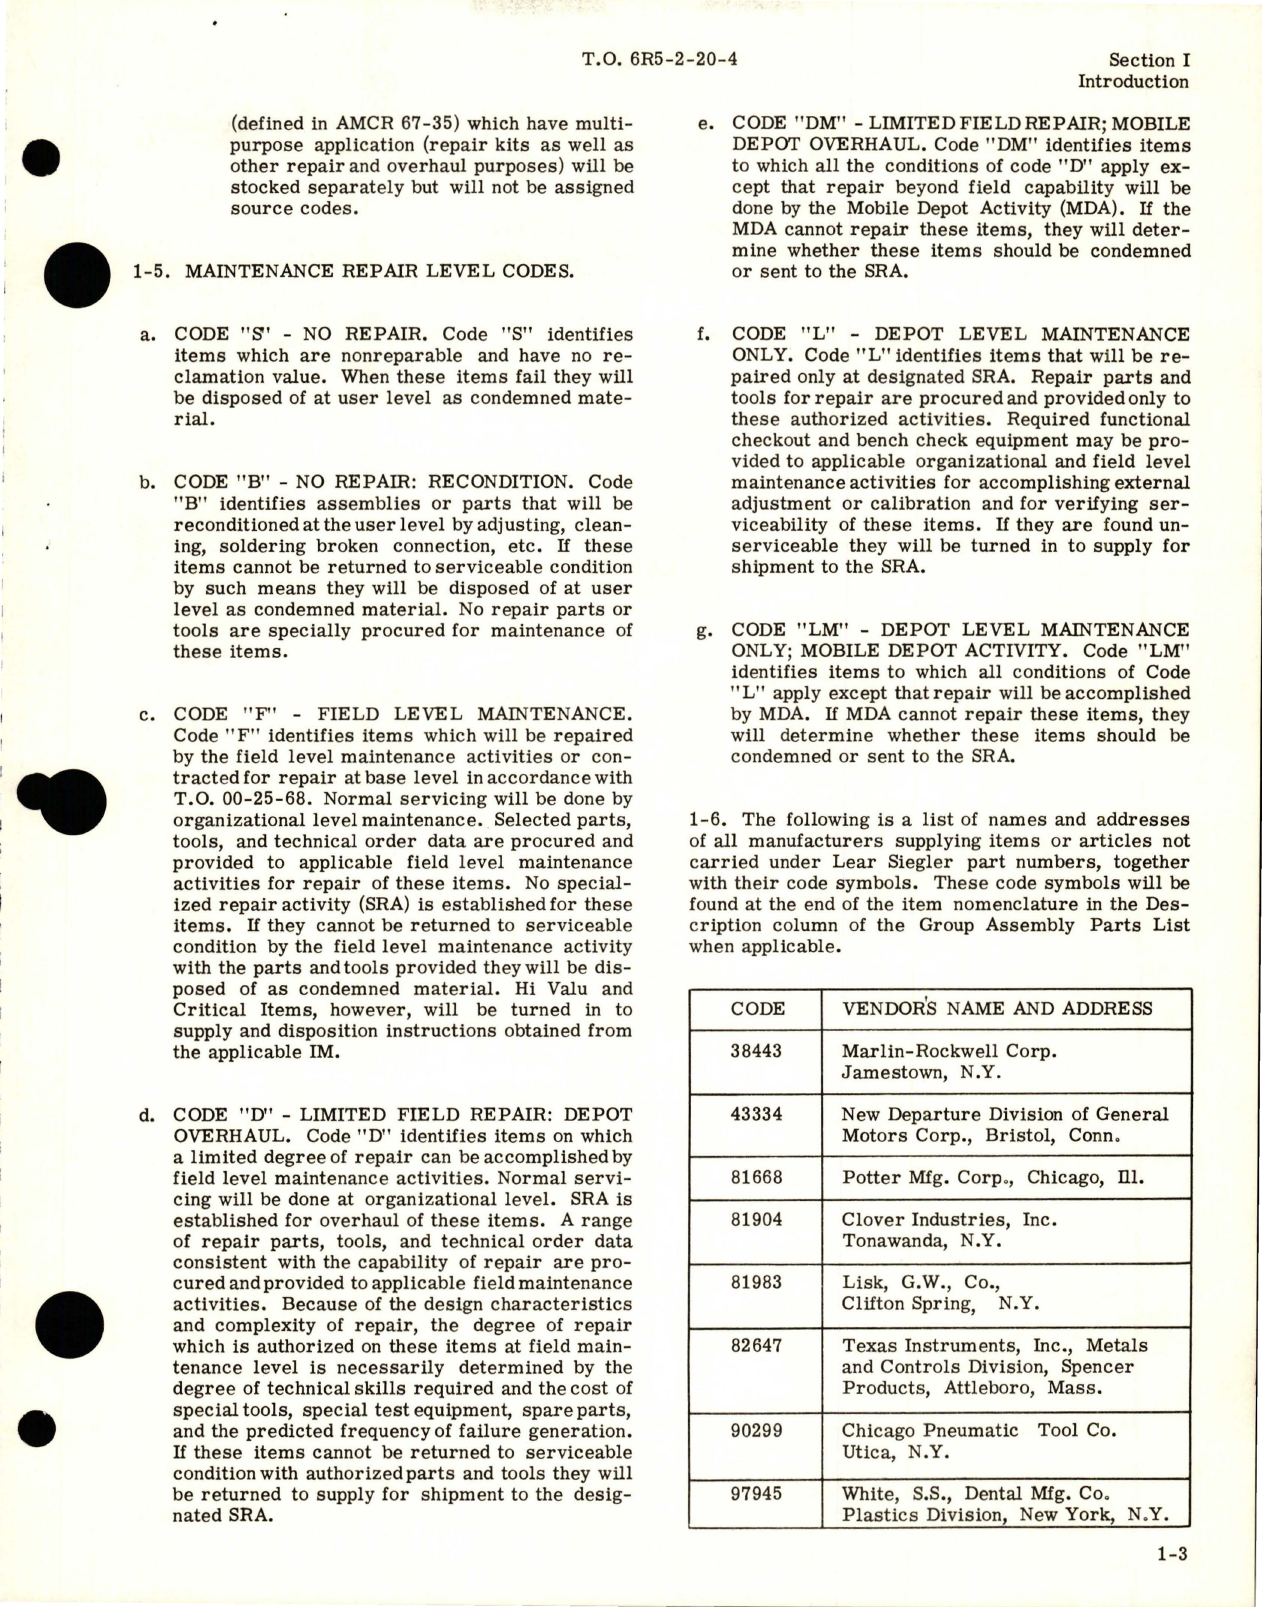 Sample page 5 from AirCorps Library document: Illustrated Parts Breakdown for Power Driven Rotary Pump - Models RG8825F and RG8825A